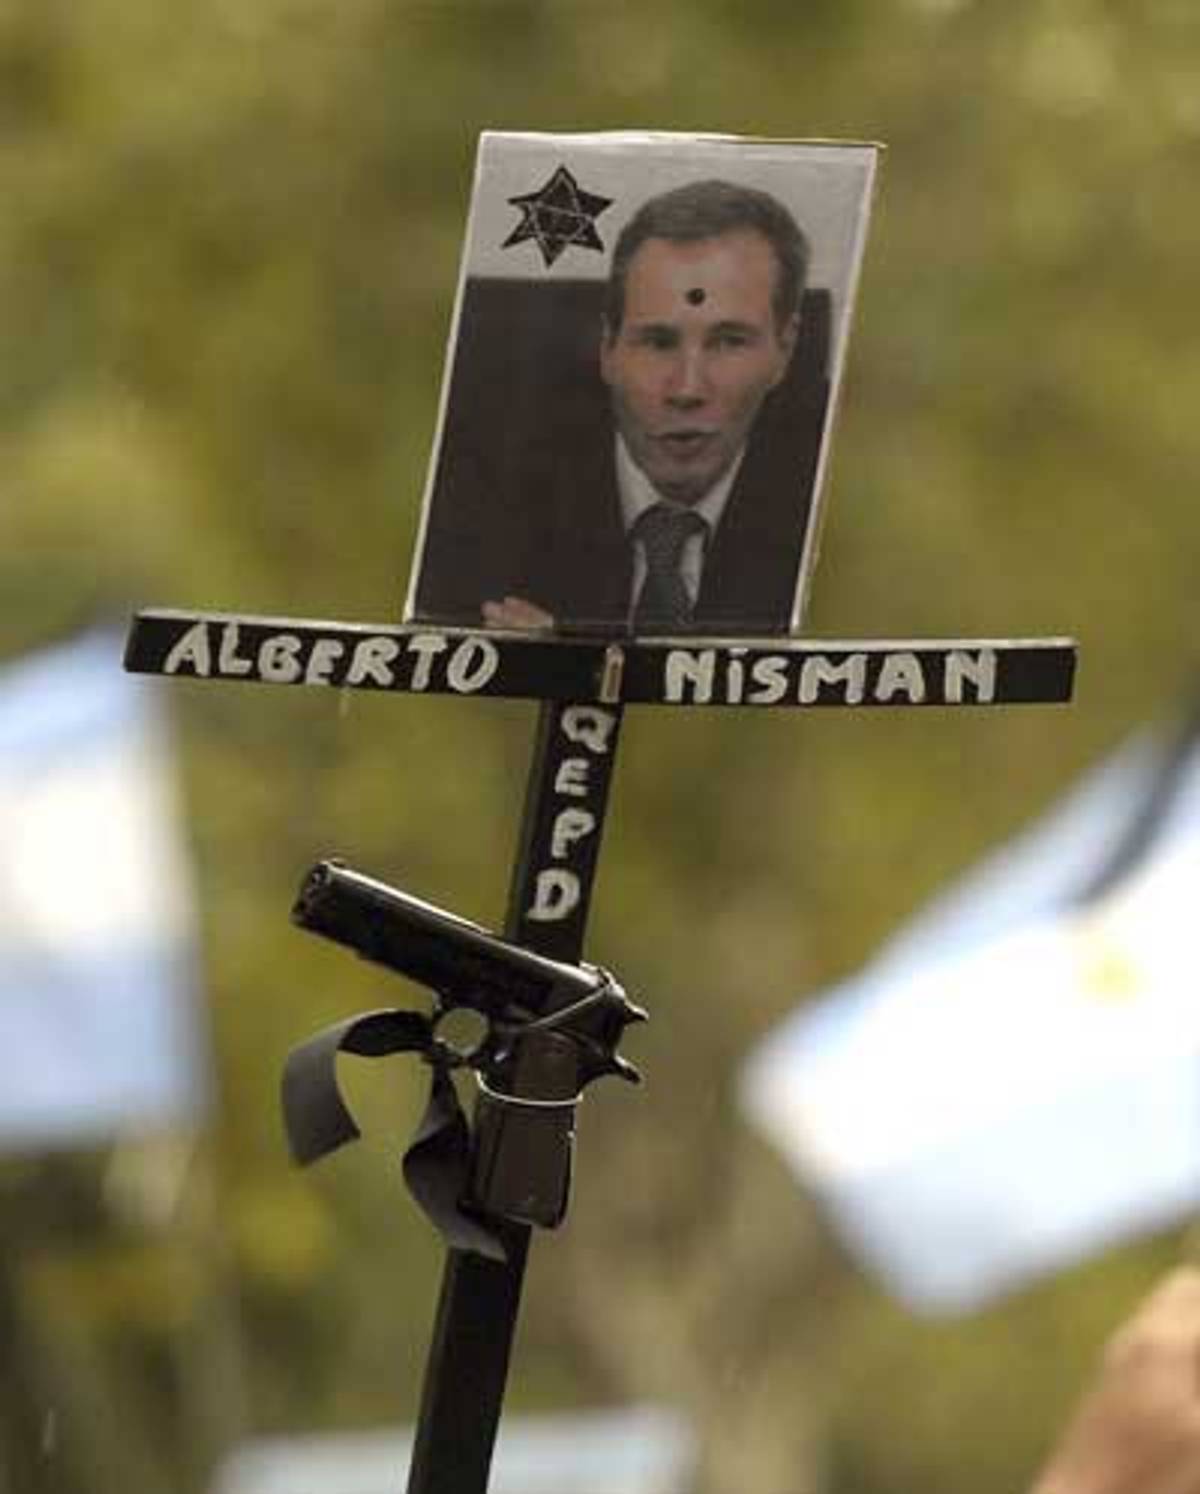 March of Silence called by Argentine prosecutors in memory of their late colleague Alberto Nisman in Buenos Aires on February 18, 2015. (Photo: Juan Mabromata/AFP/Getty Images)